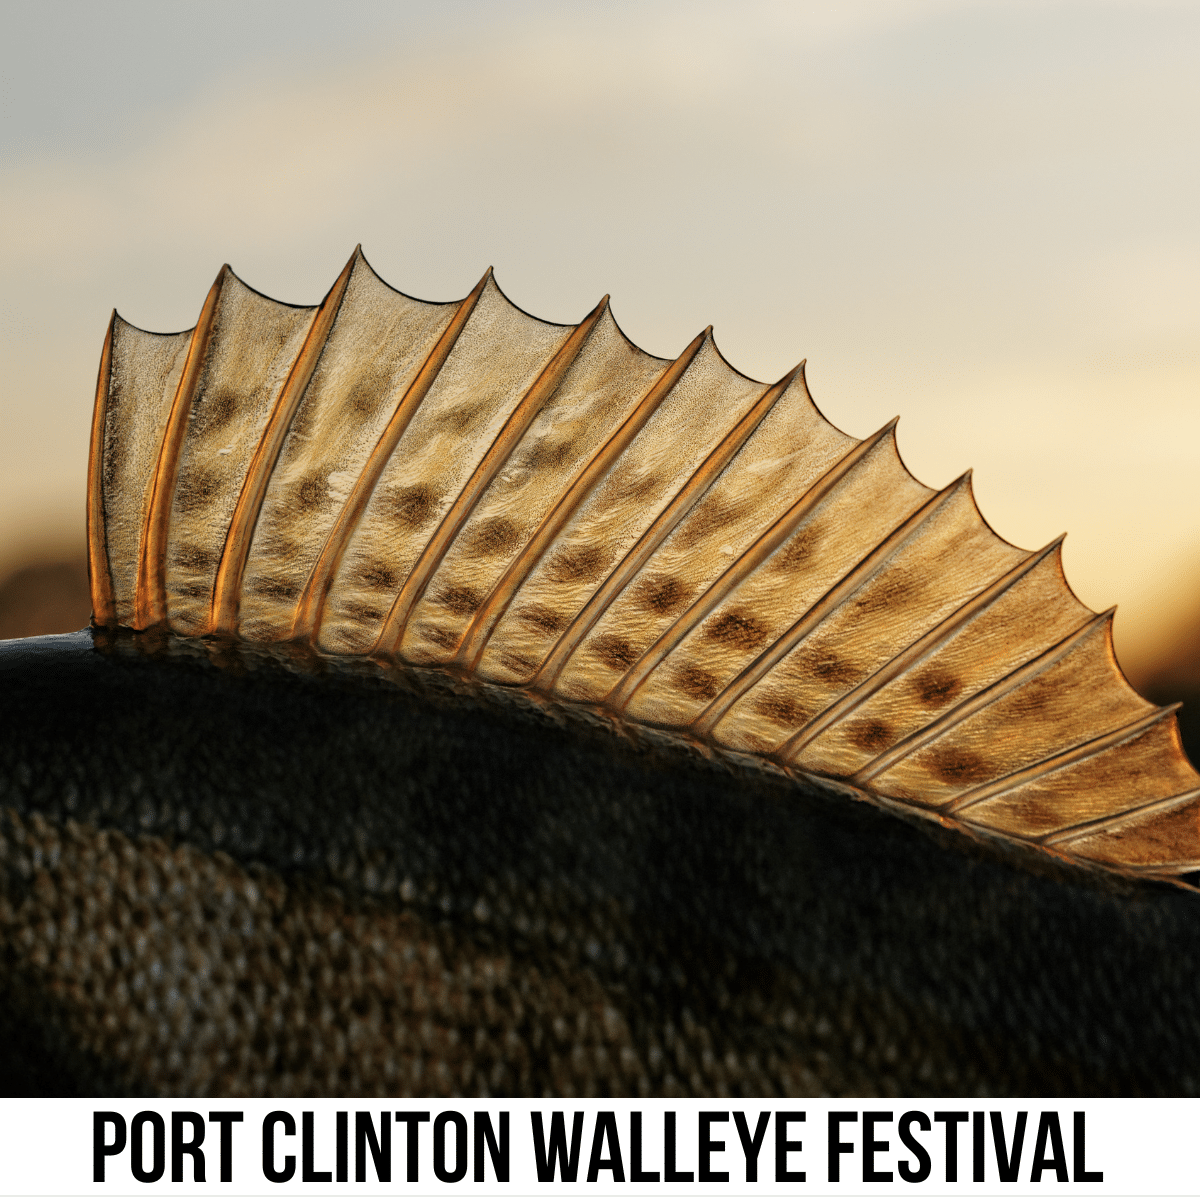 A square image of a photo of the dorsal fin on a fish. A white strip across the bottom has text Port Clinton Walleye Festival.